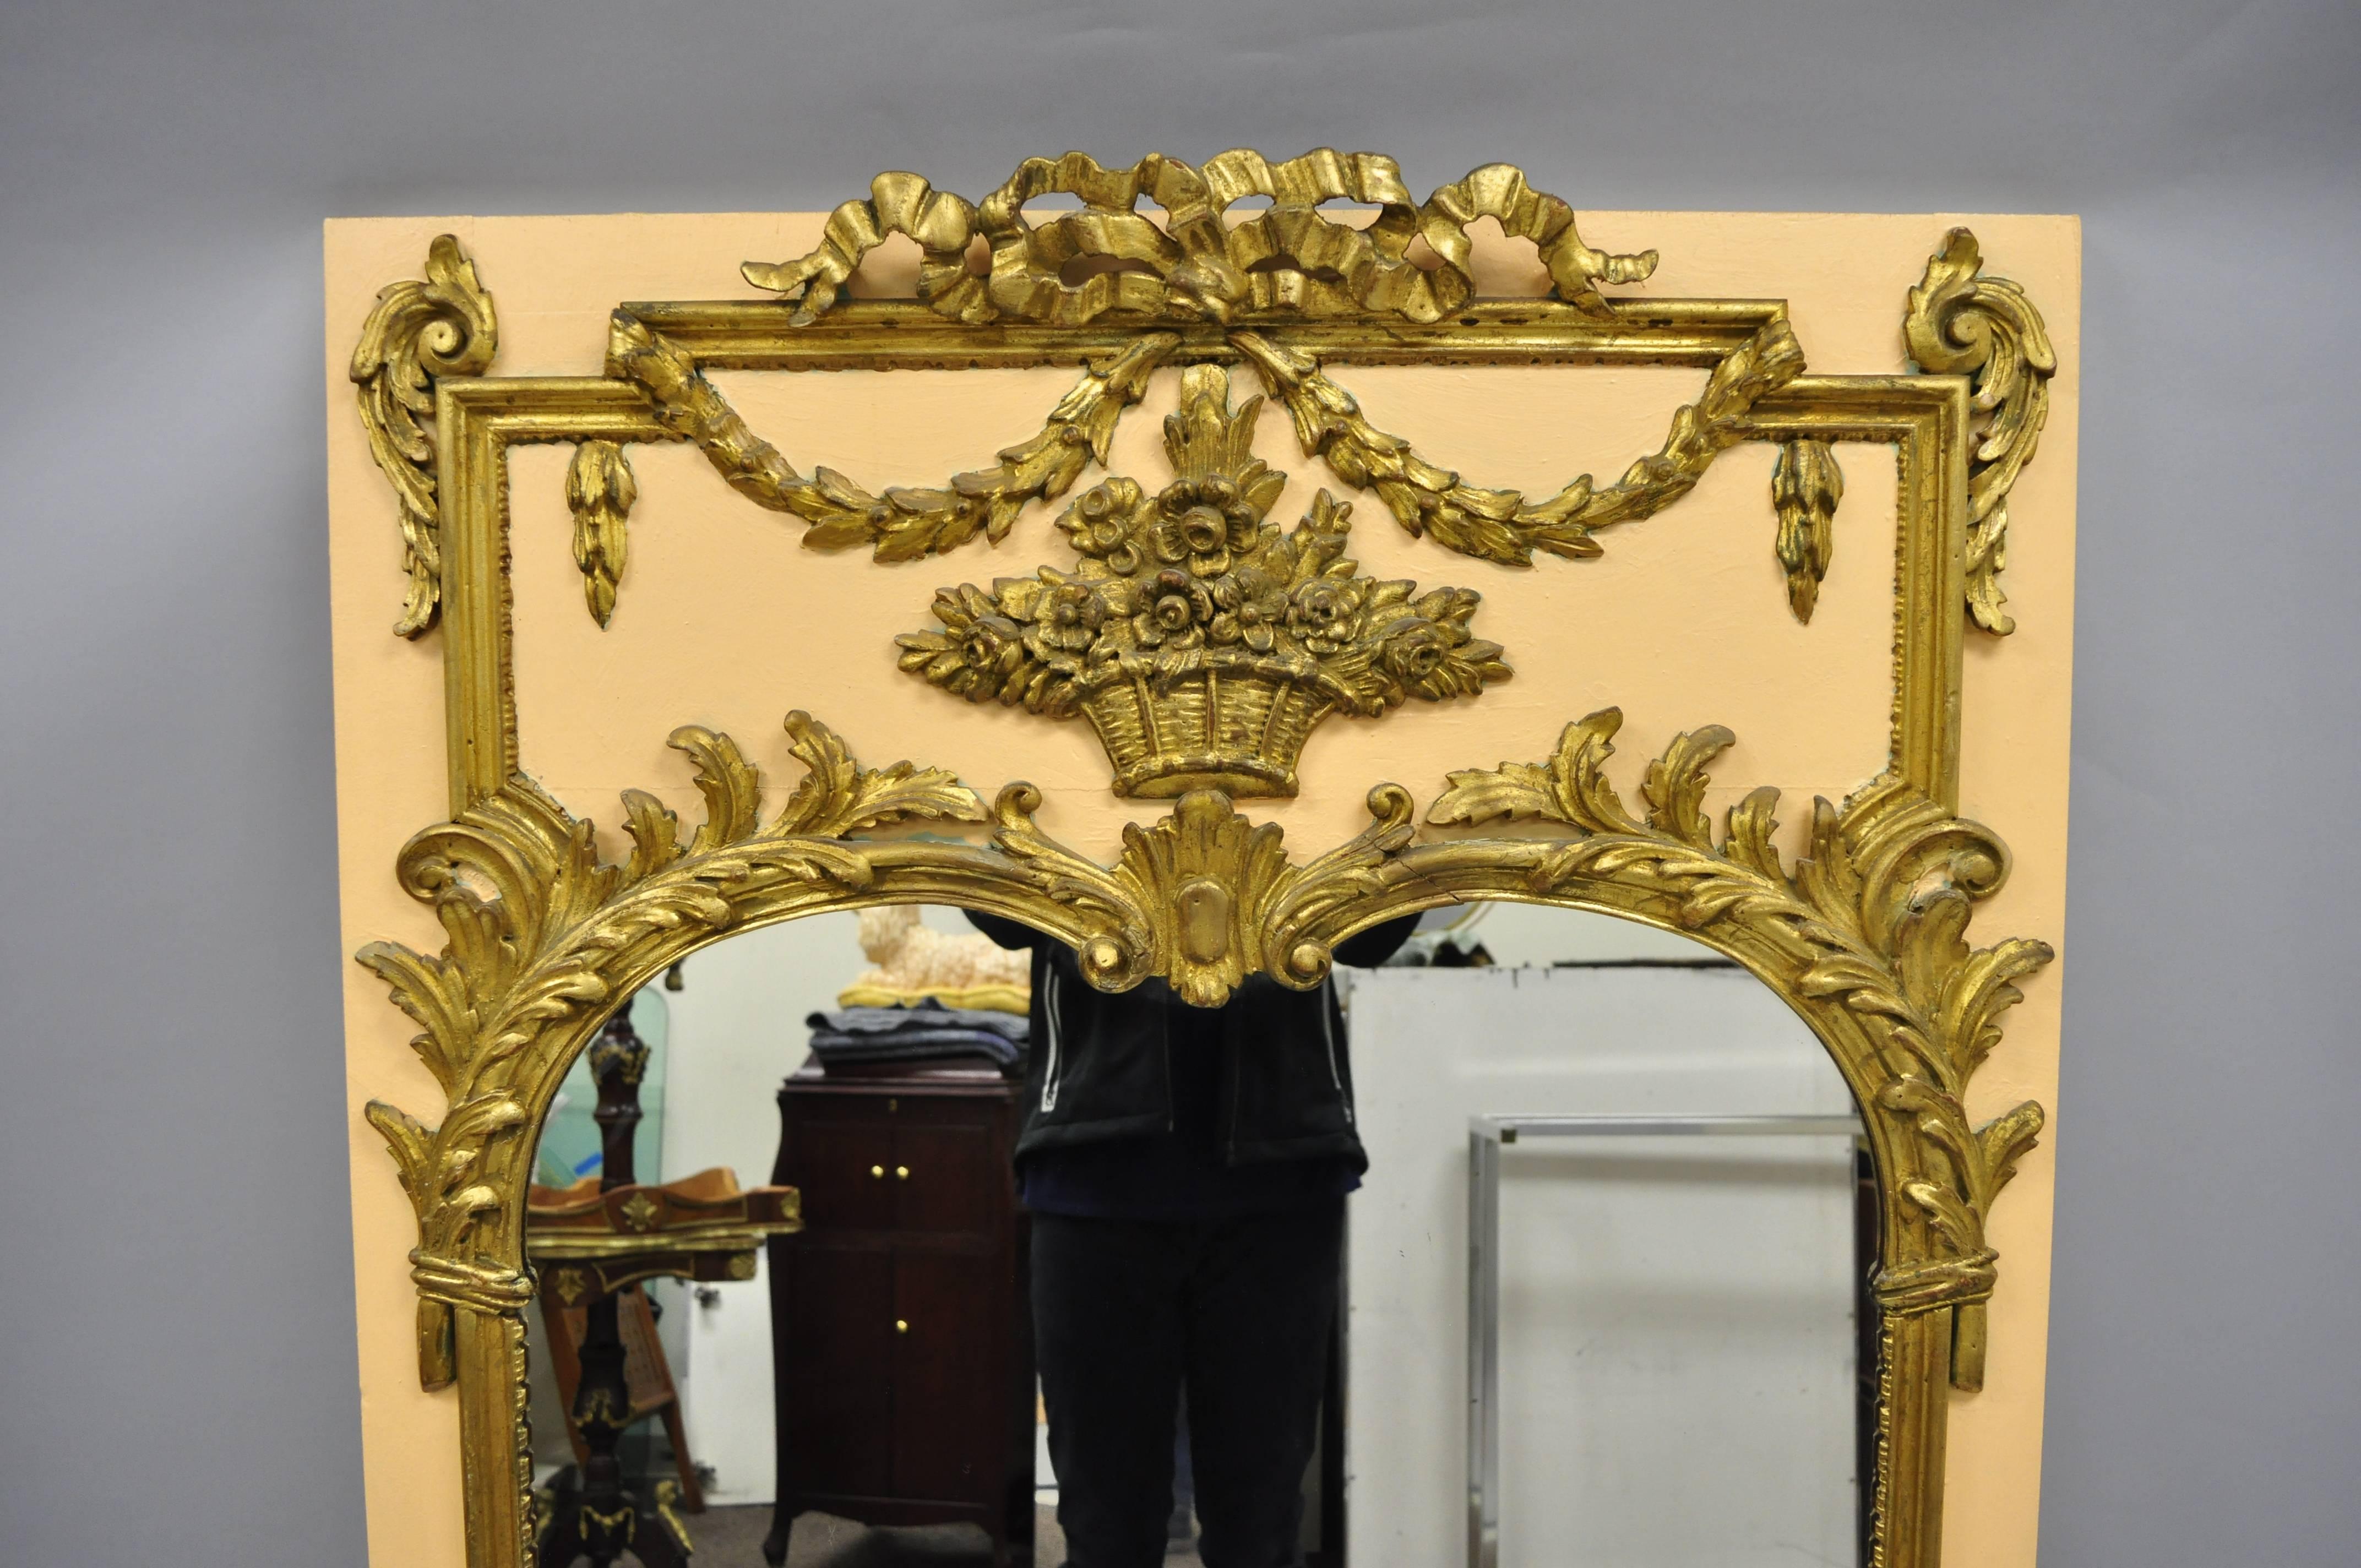 Antique French Louis XV style giltwood trumeau wall mirror in peach and gold. Item features peach and gold finish, carved wood bouquet, drape and acanthus leaf scroll work, solid wood frame, nicely carved details, very nice antique item, early 20th